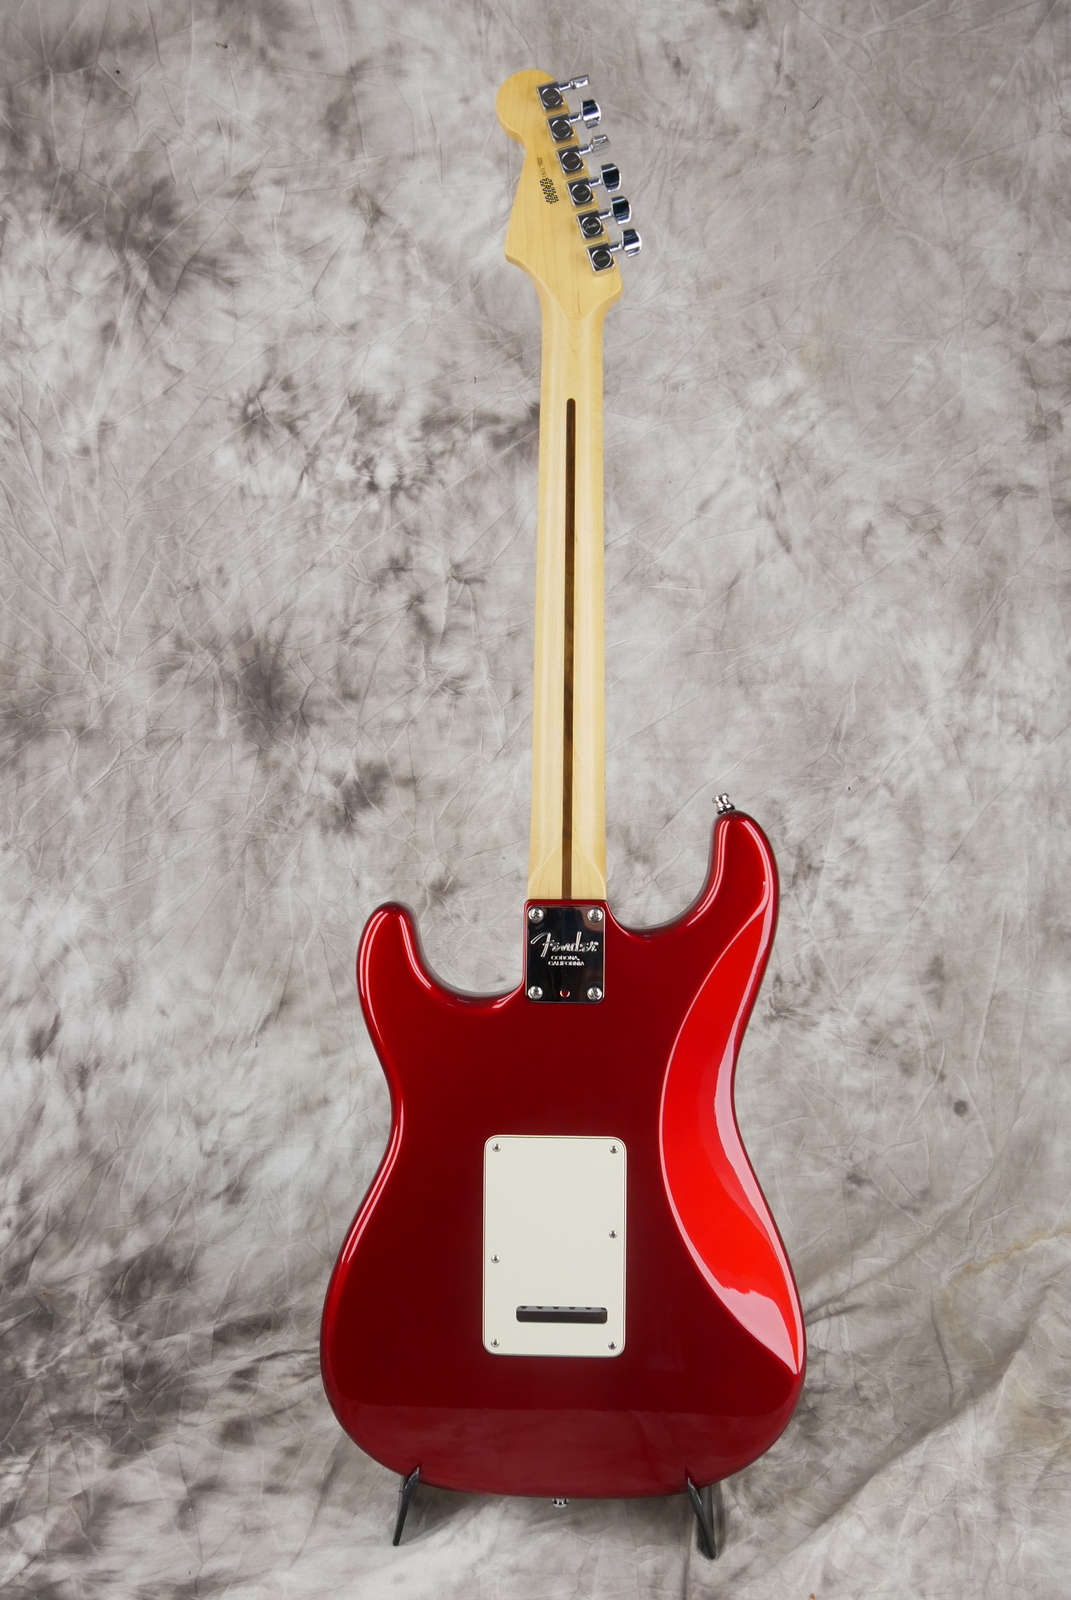 Fender_Stratocaster_USA_built_from_parts_candy_apple_red_2015-002.JPG